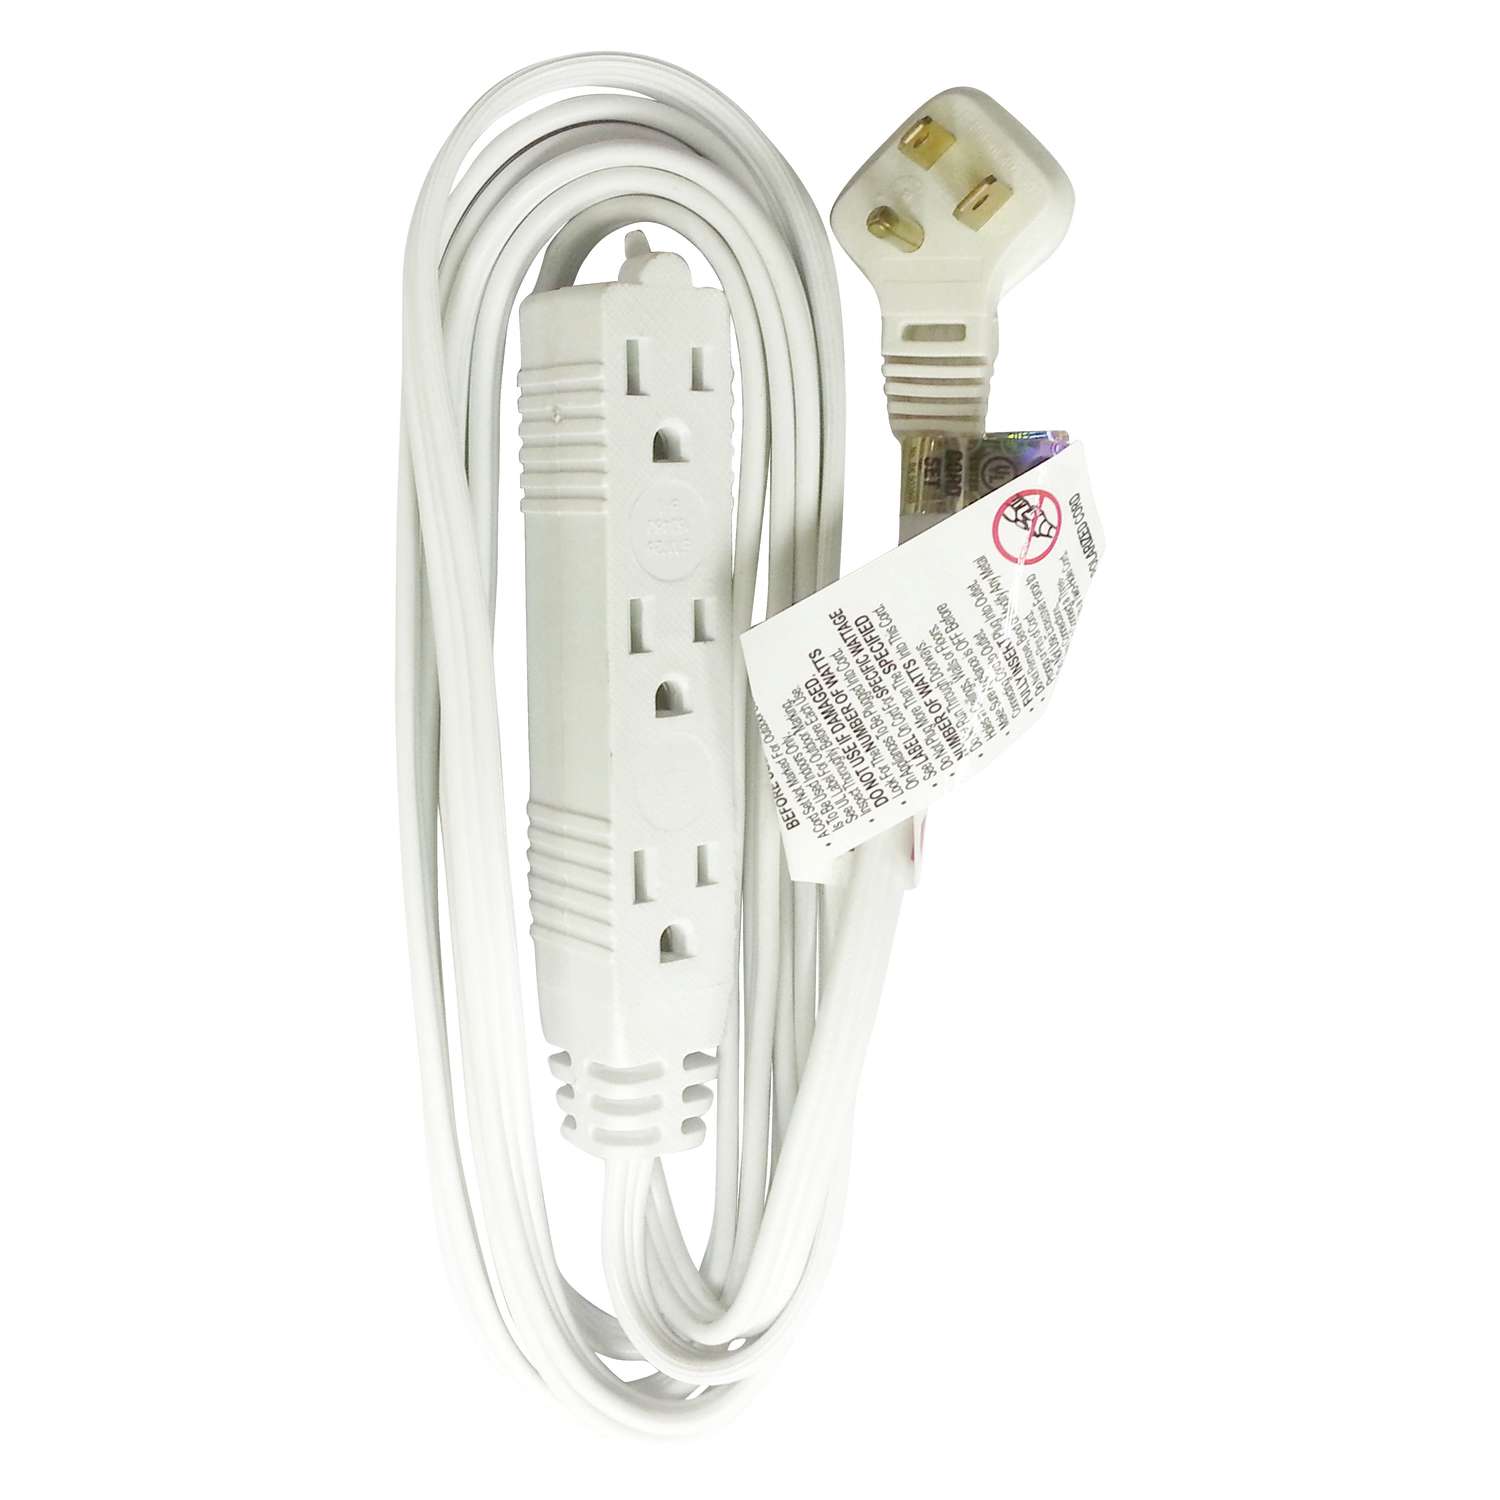 safety - Is 12 gauge electrical cable ever wrapped in a white sheath? -  Home Improvement Stack Exchange